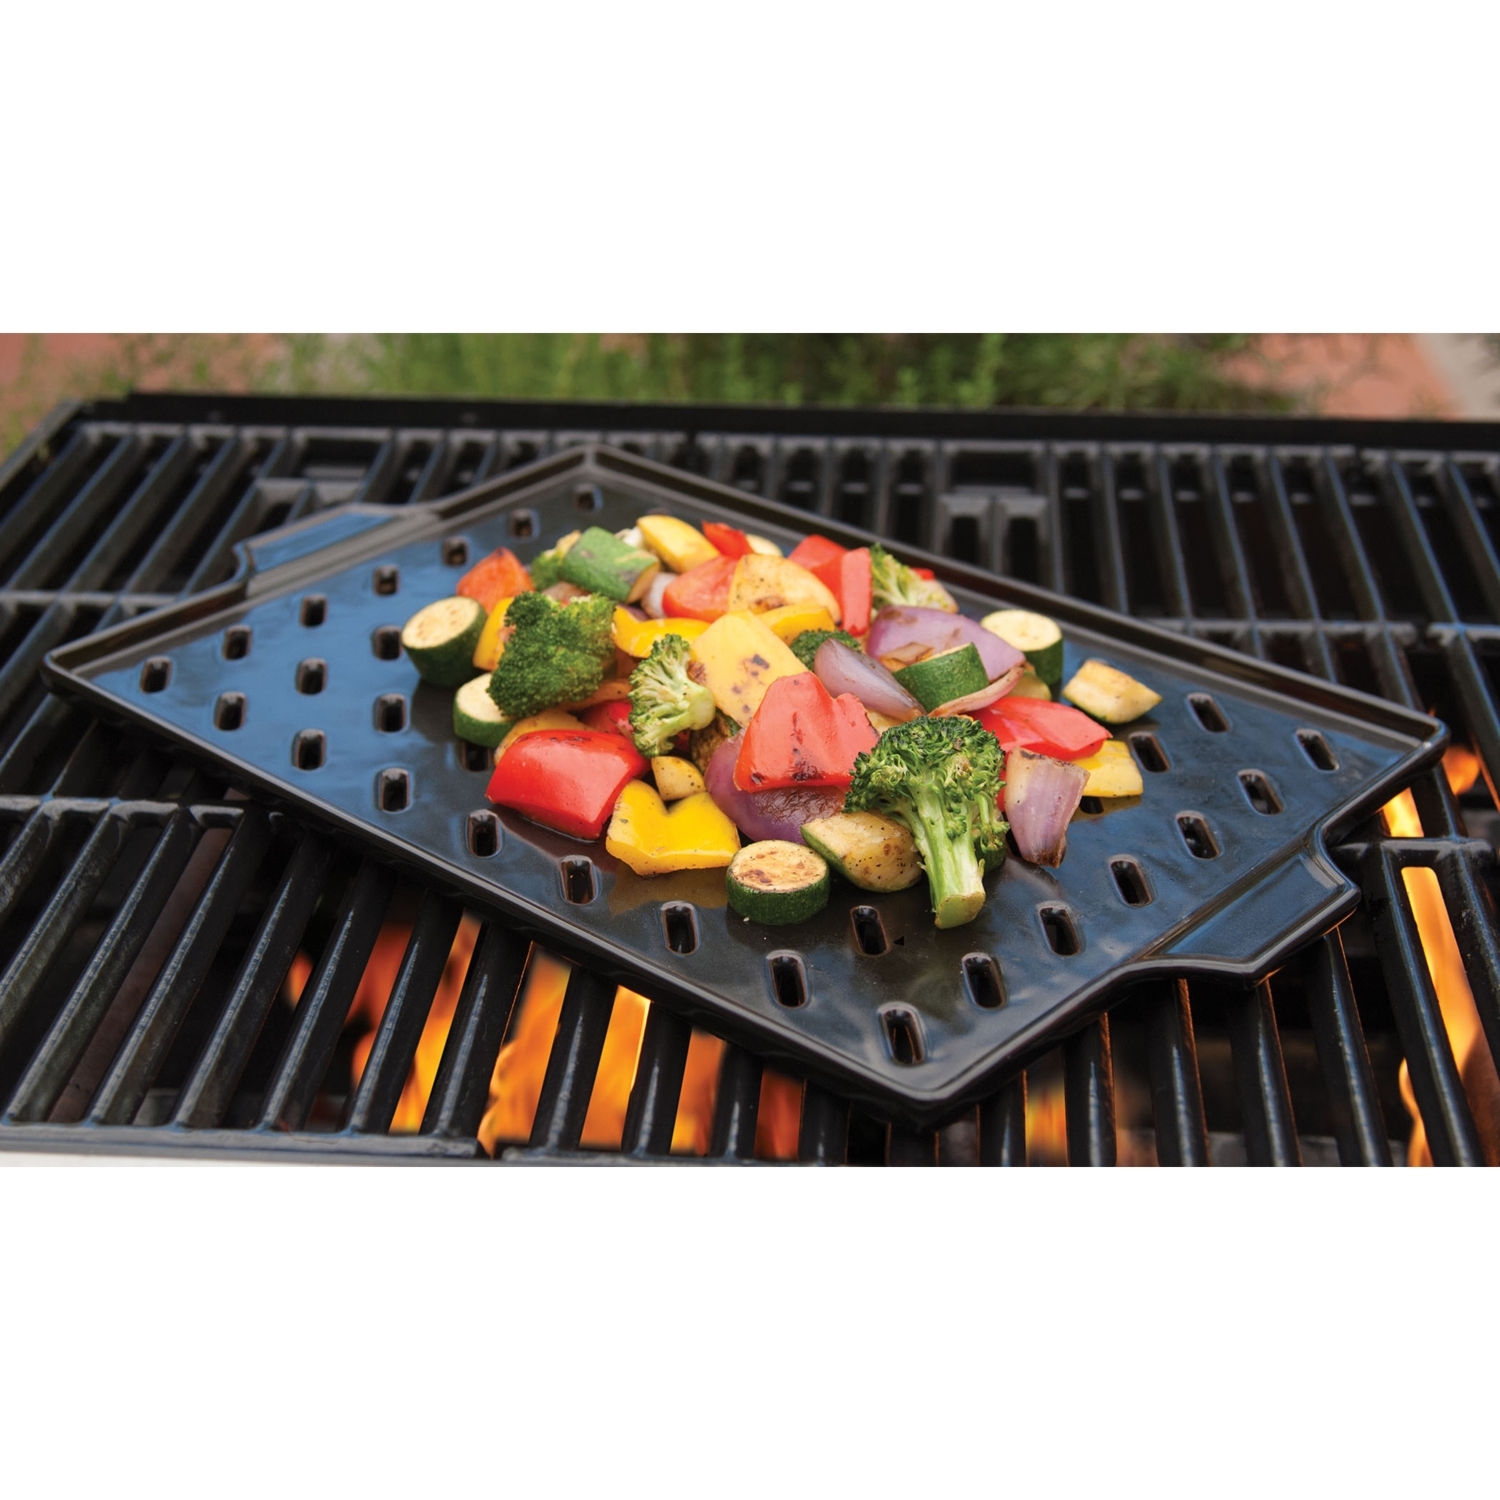 Charcoal Companion Flame-Friendly Ceramic Grilling Grid Image 2